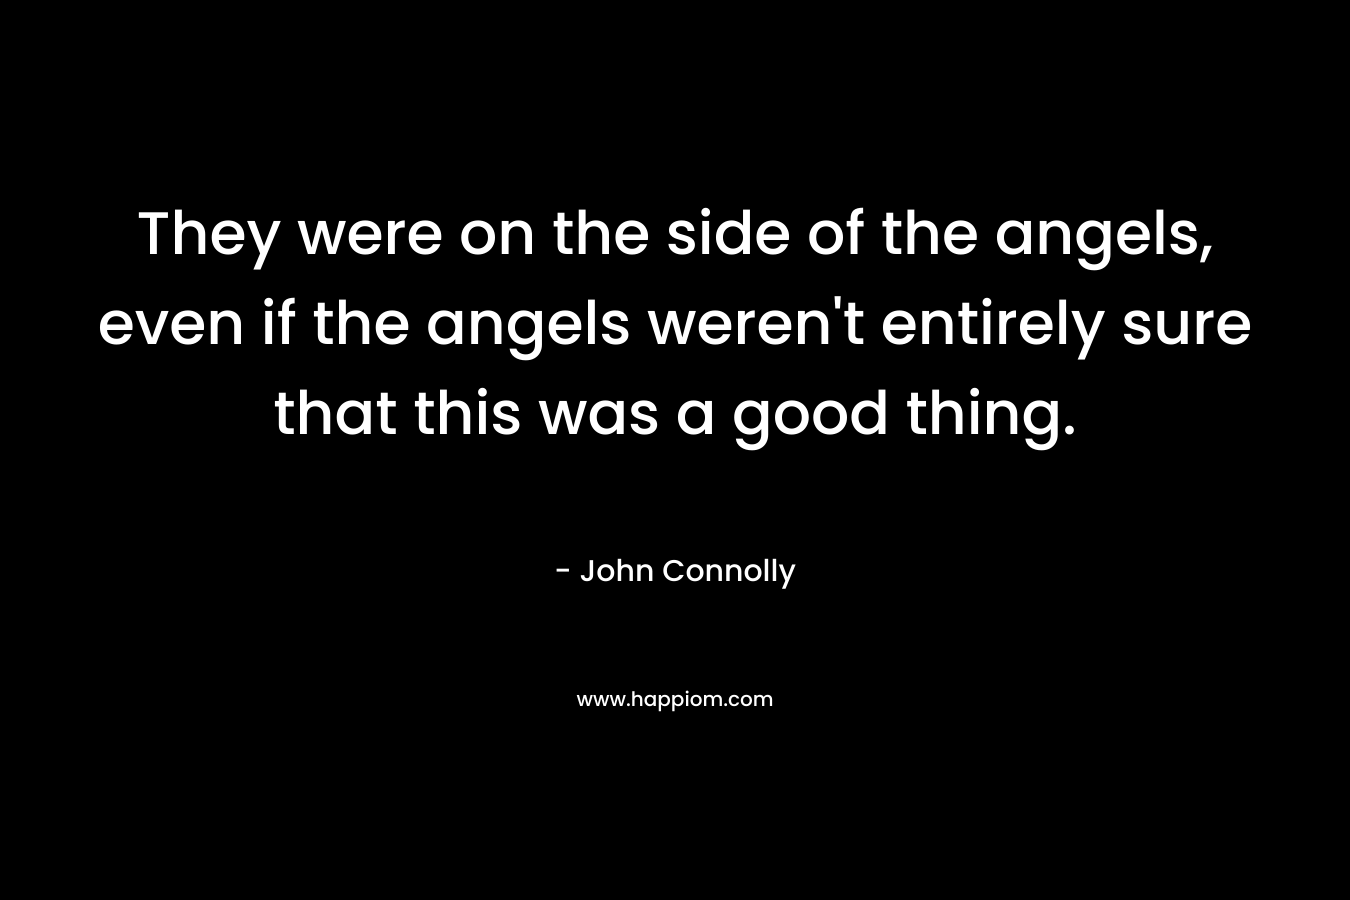 They were on the side of the angels, even if the angels weren’t entirely sure that this was a good thing. – John Connolly